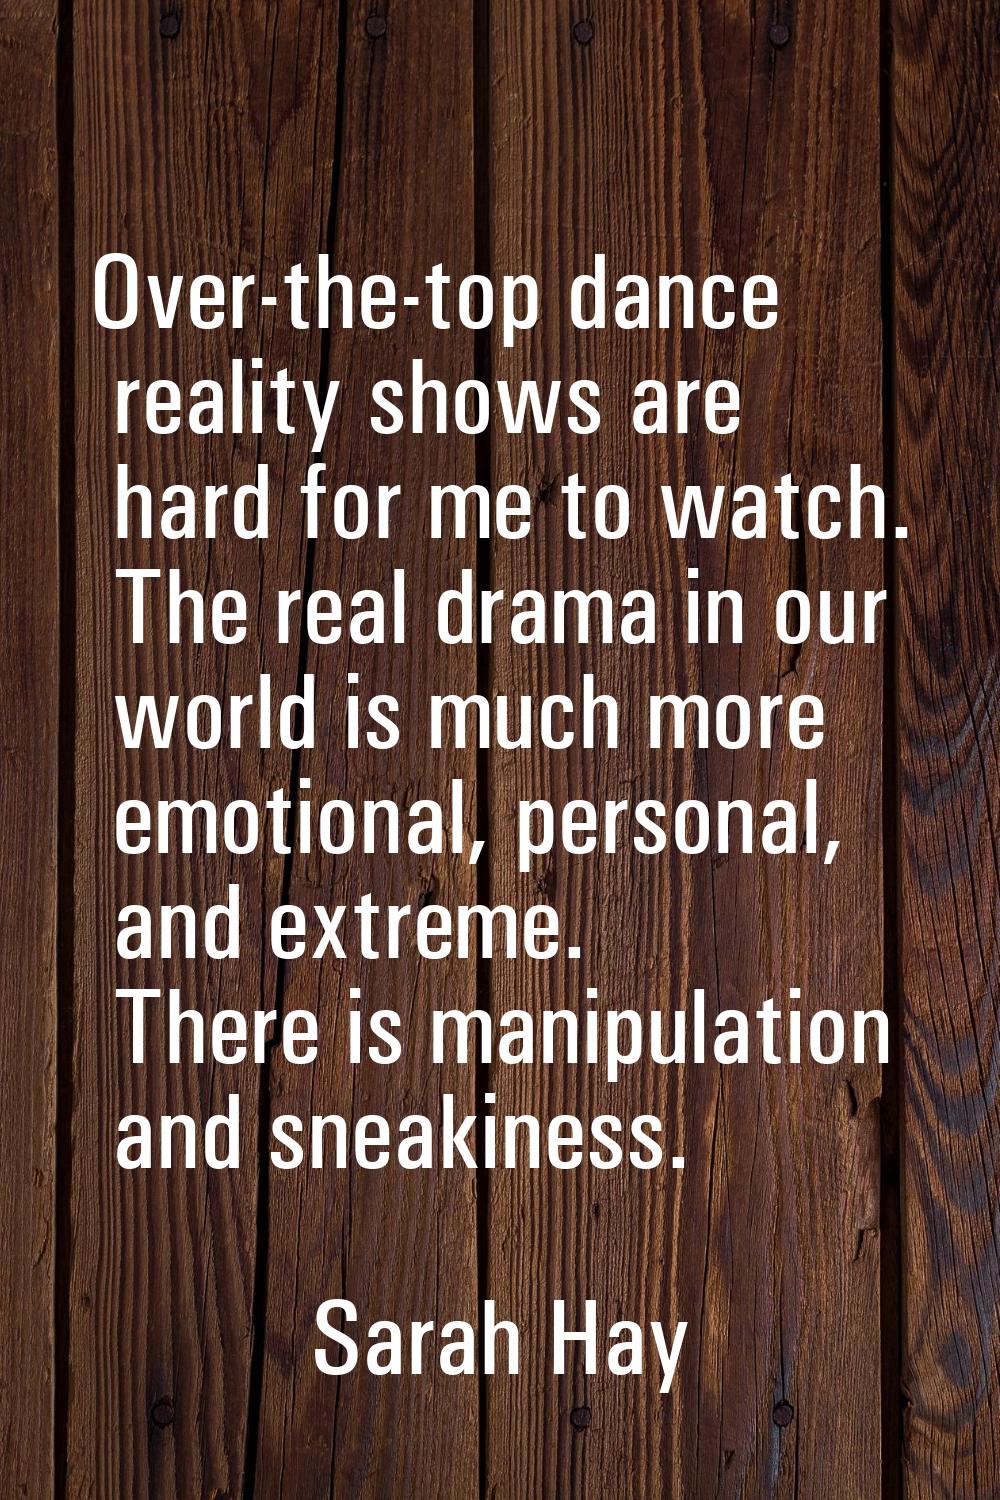 Over-the-top dance reality shows are hard for me to watch. The real drama in our world is much more